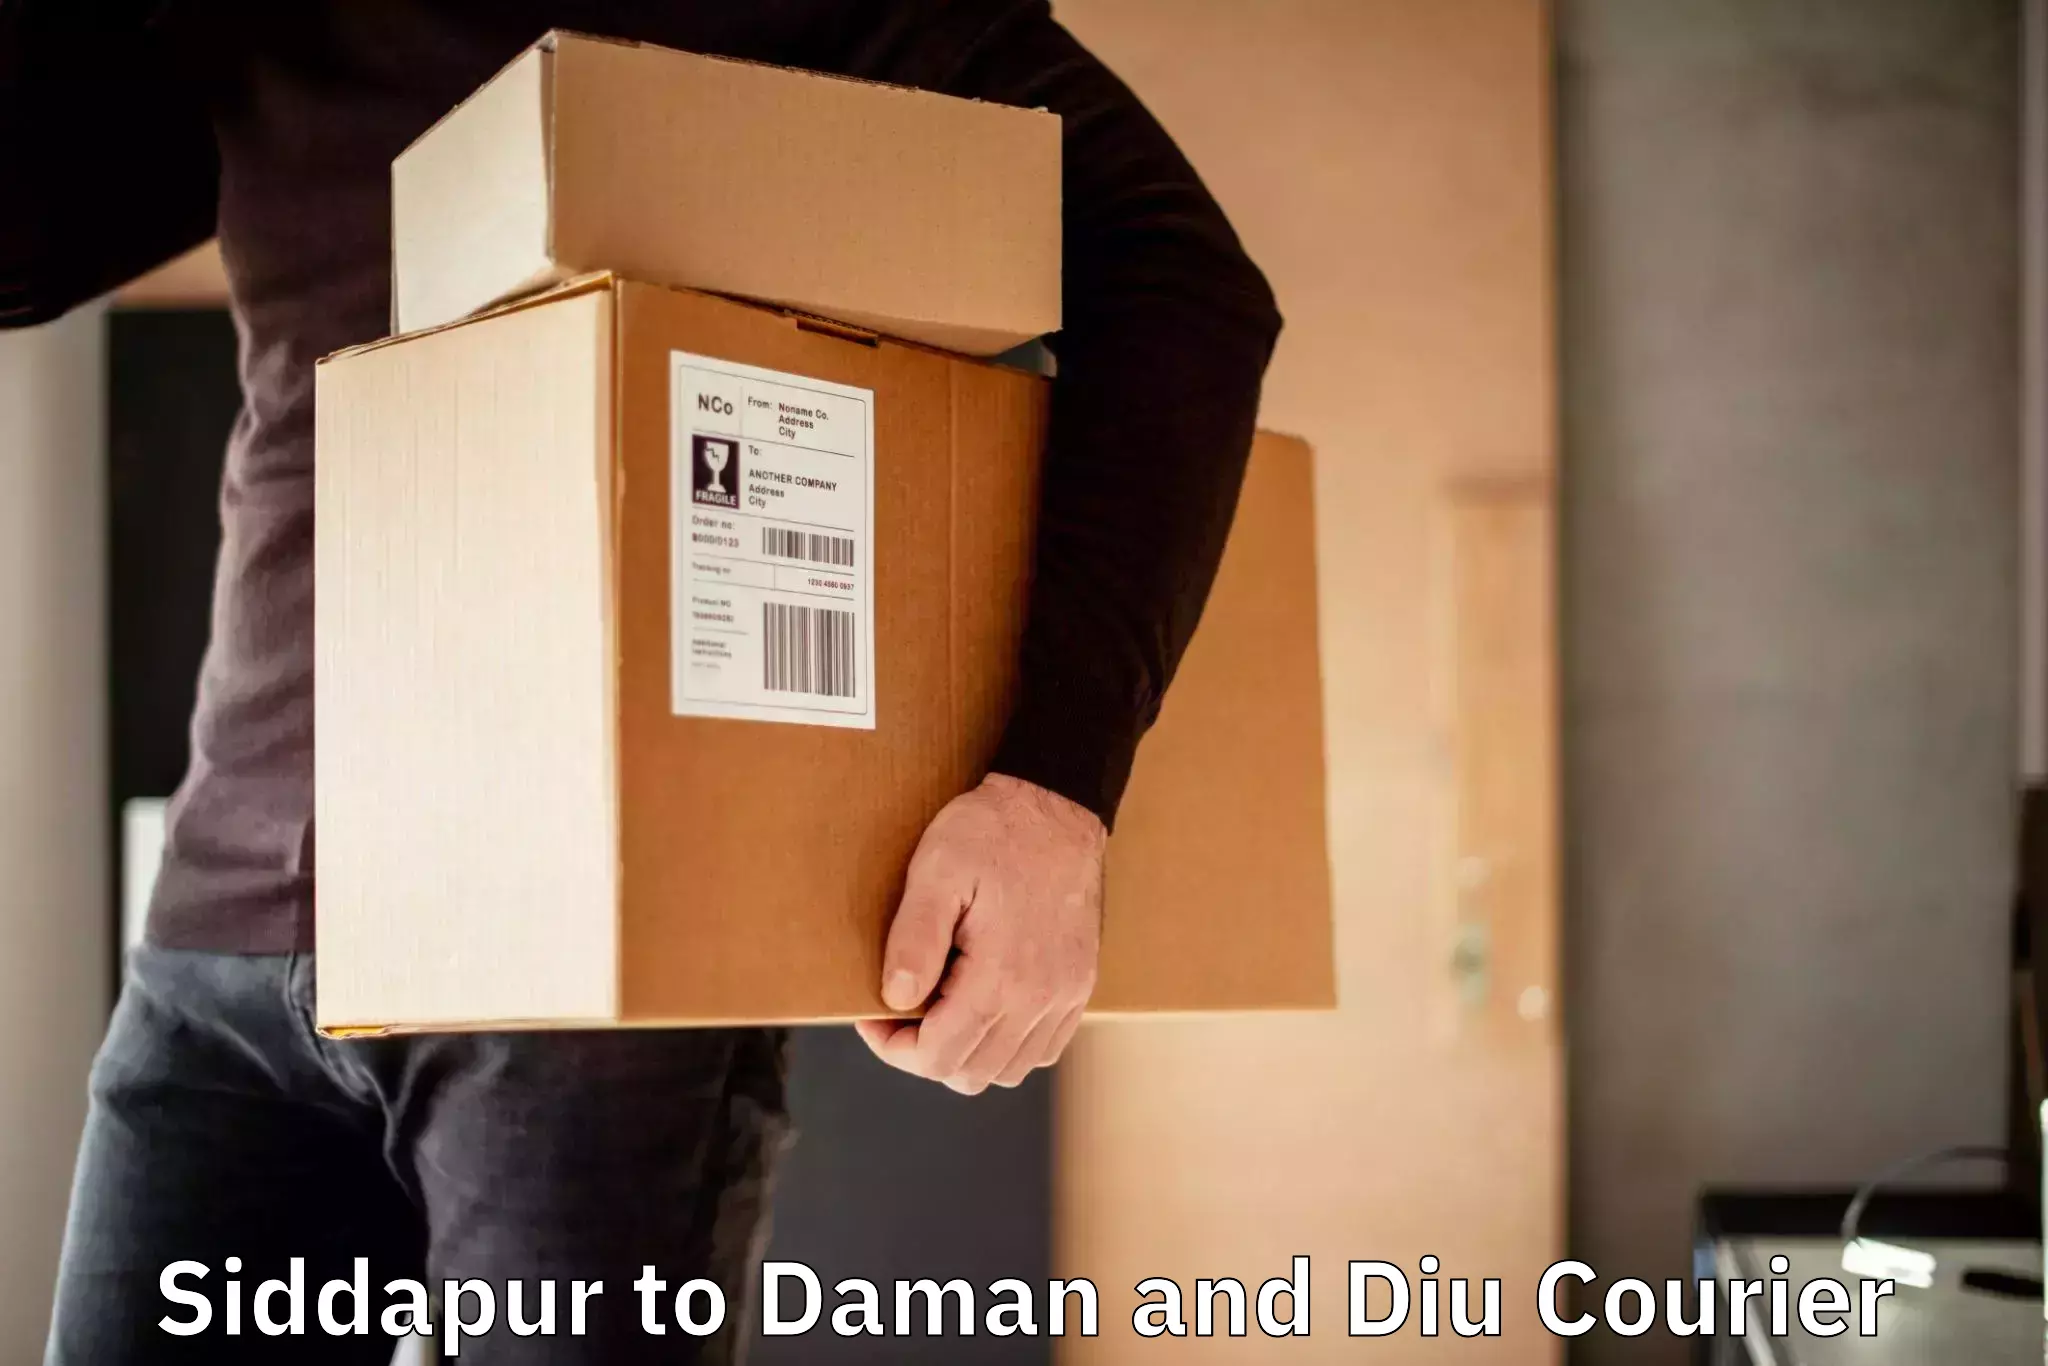 Courier dispatch services Siddapur to Diu